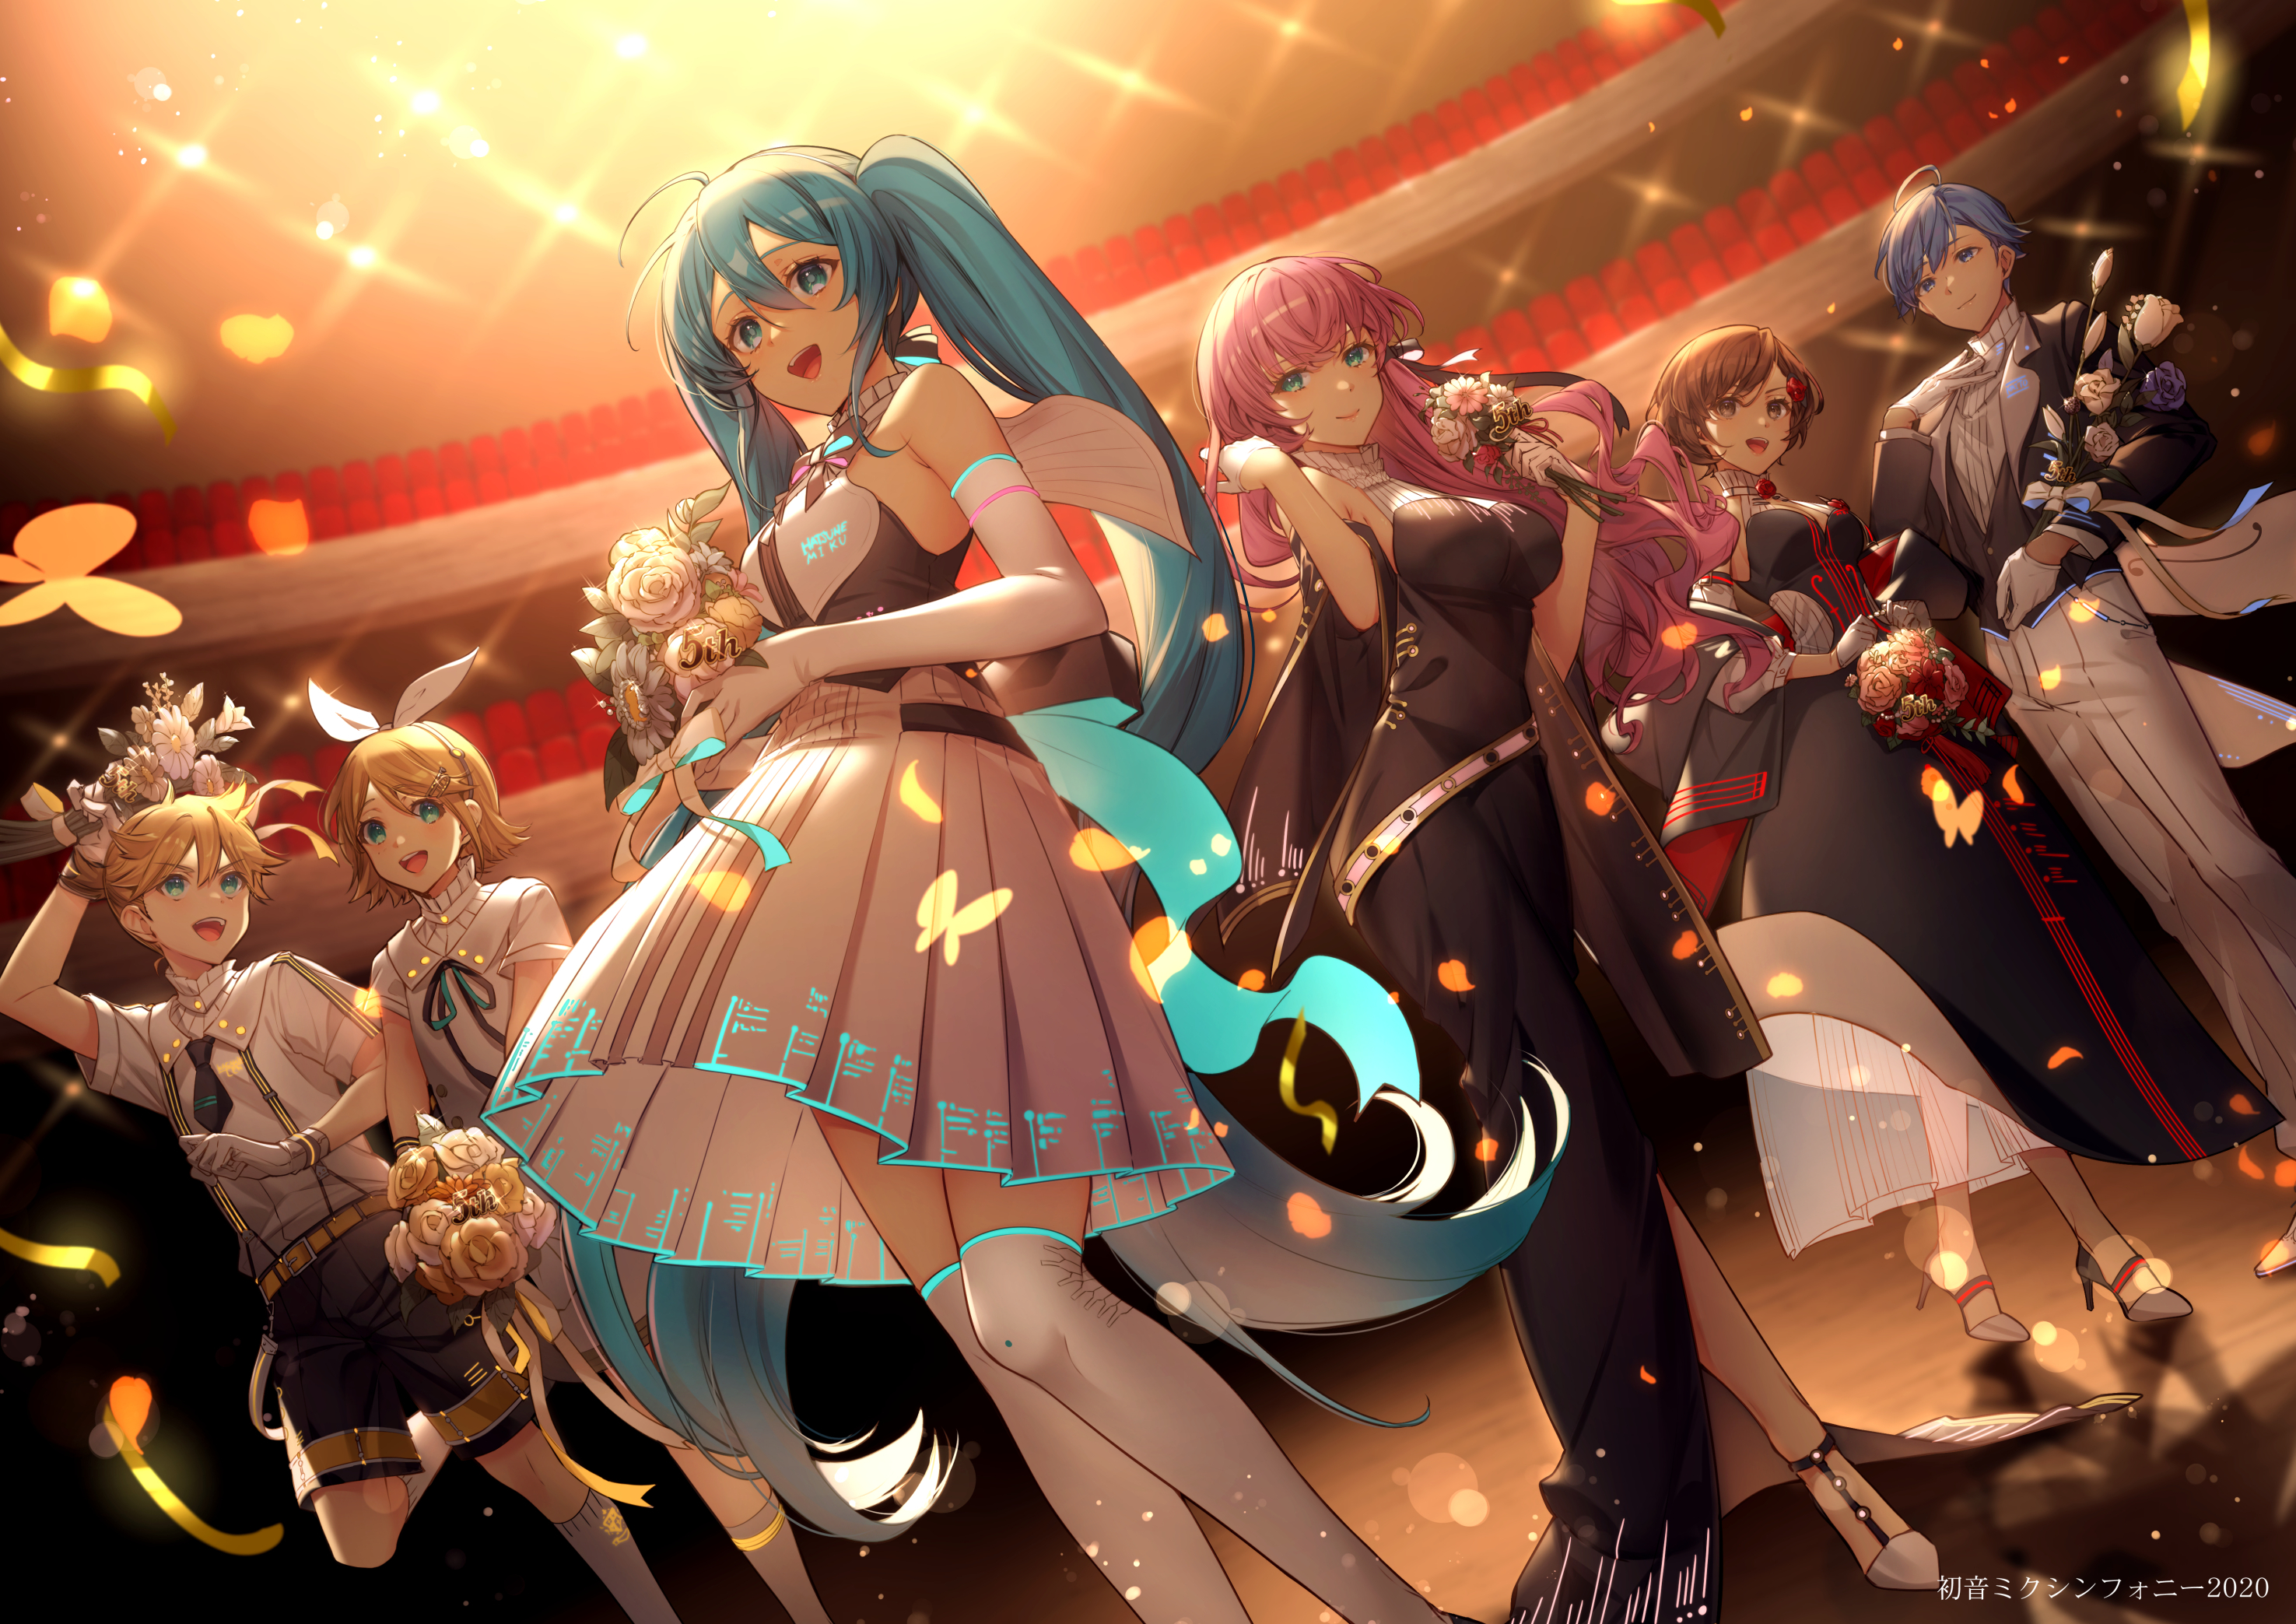 7x1544 Vocaloid Girl Group 7x1544 Resolution Wallpaper Hd Anime 4k Wallpapers Images Photos And Background Wallpapers Den